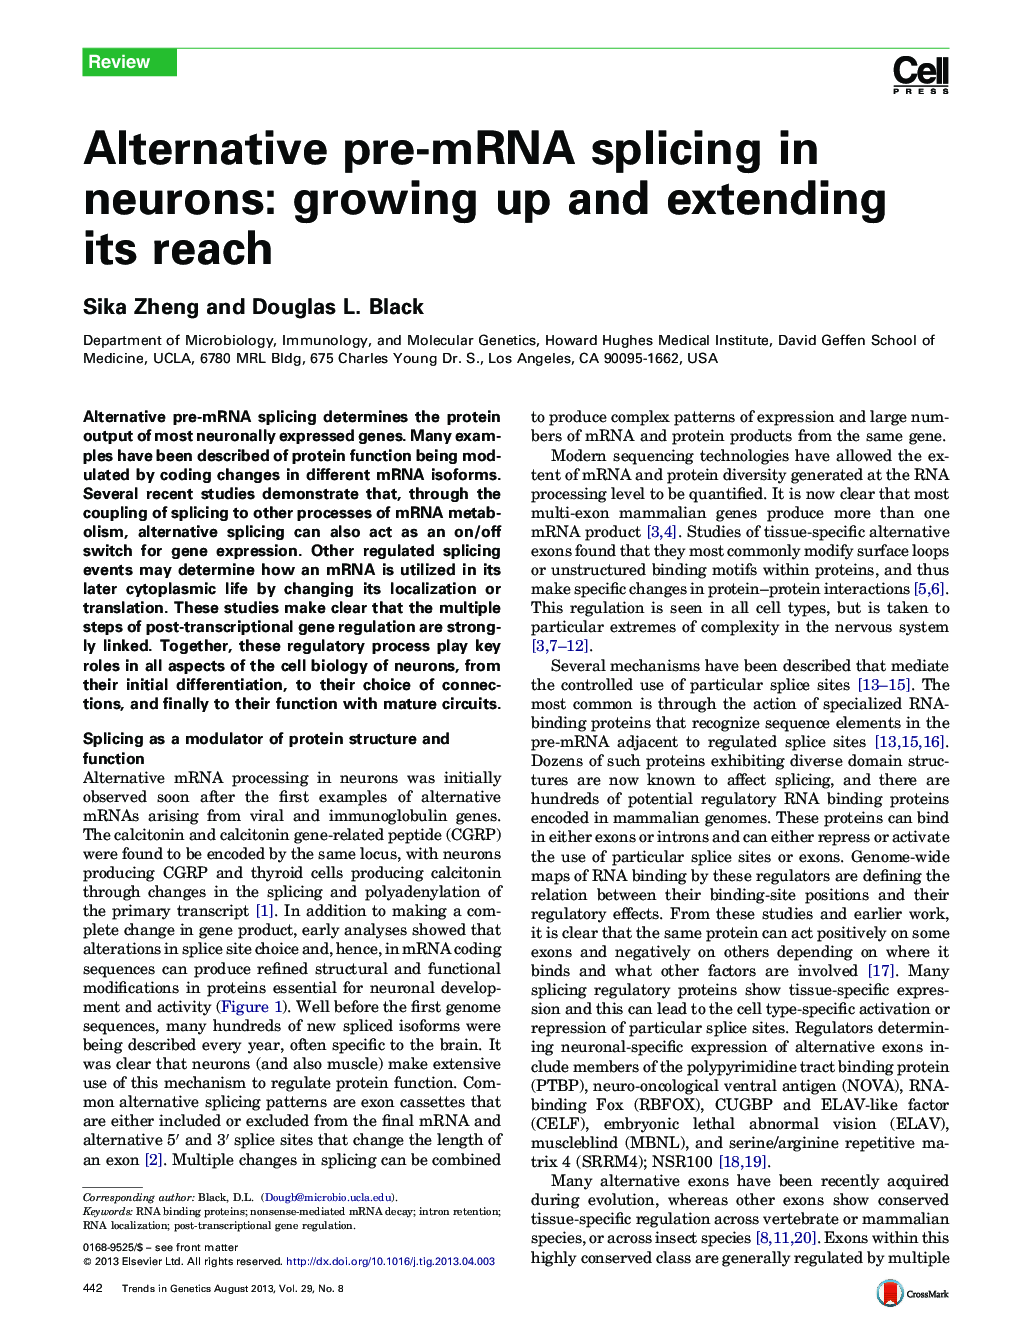 Alternative pre-mRNA splicing in neurons: growing up and extending its reach